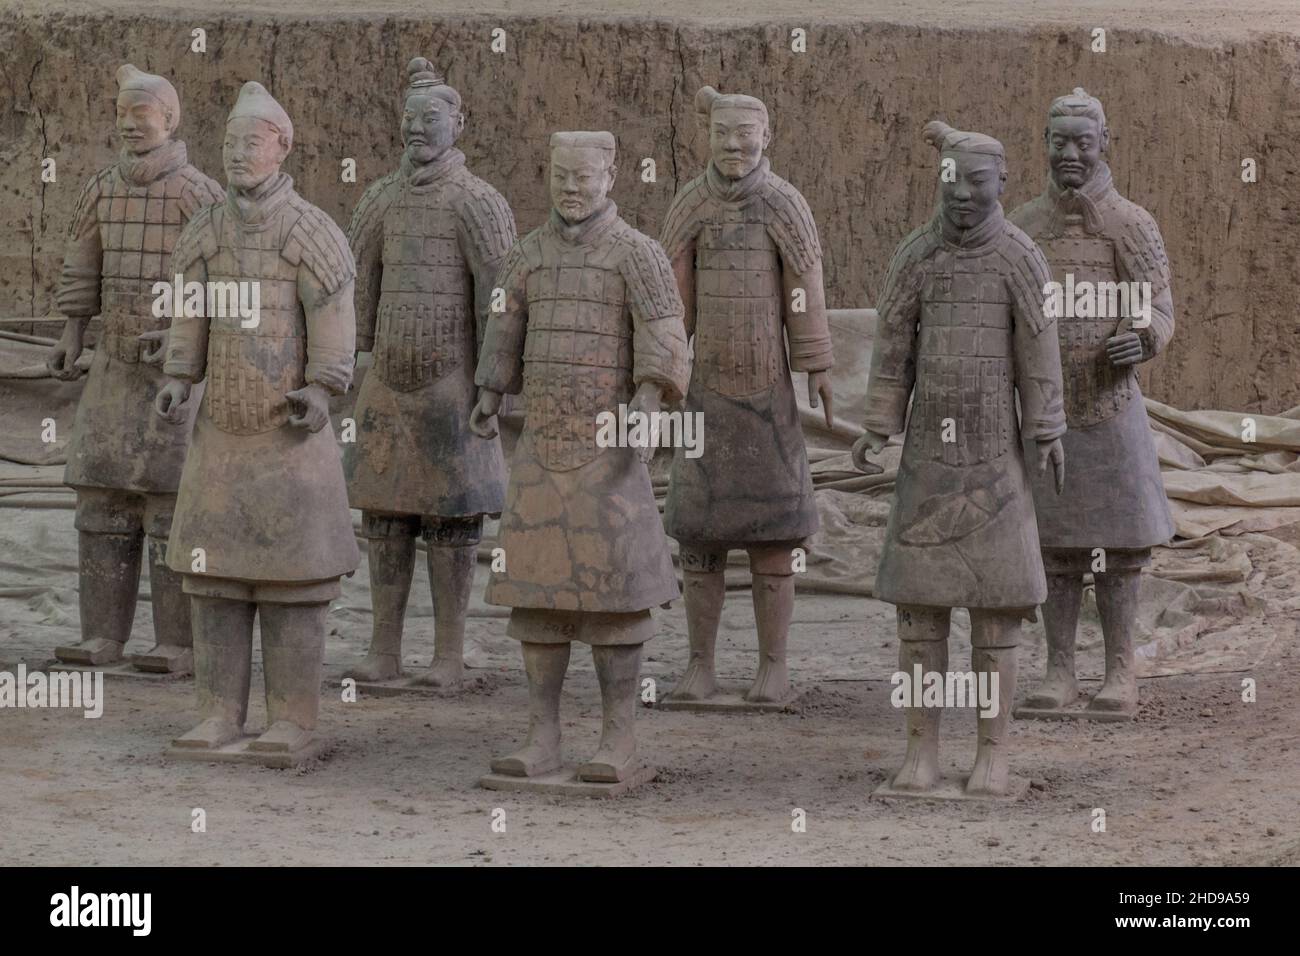 XI'AN, CHINA - AUGUST 6, 2018: Terracotta scultpures in the Pit 1 of the Army of Terracotta Warriors near Xi'an, Shaanxi province, China Stock Photo